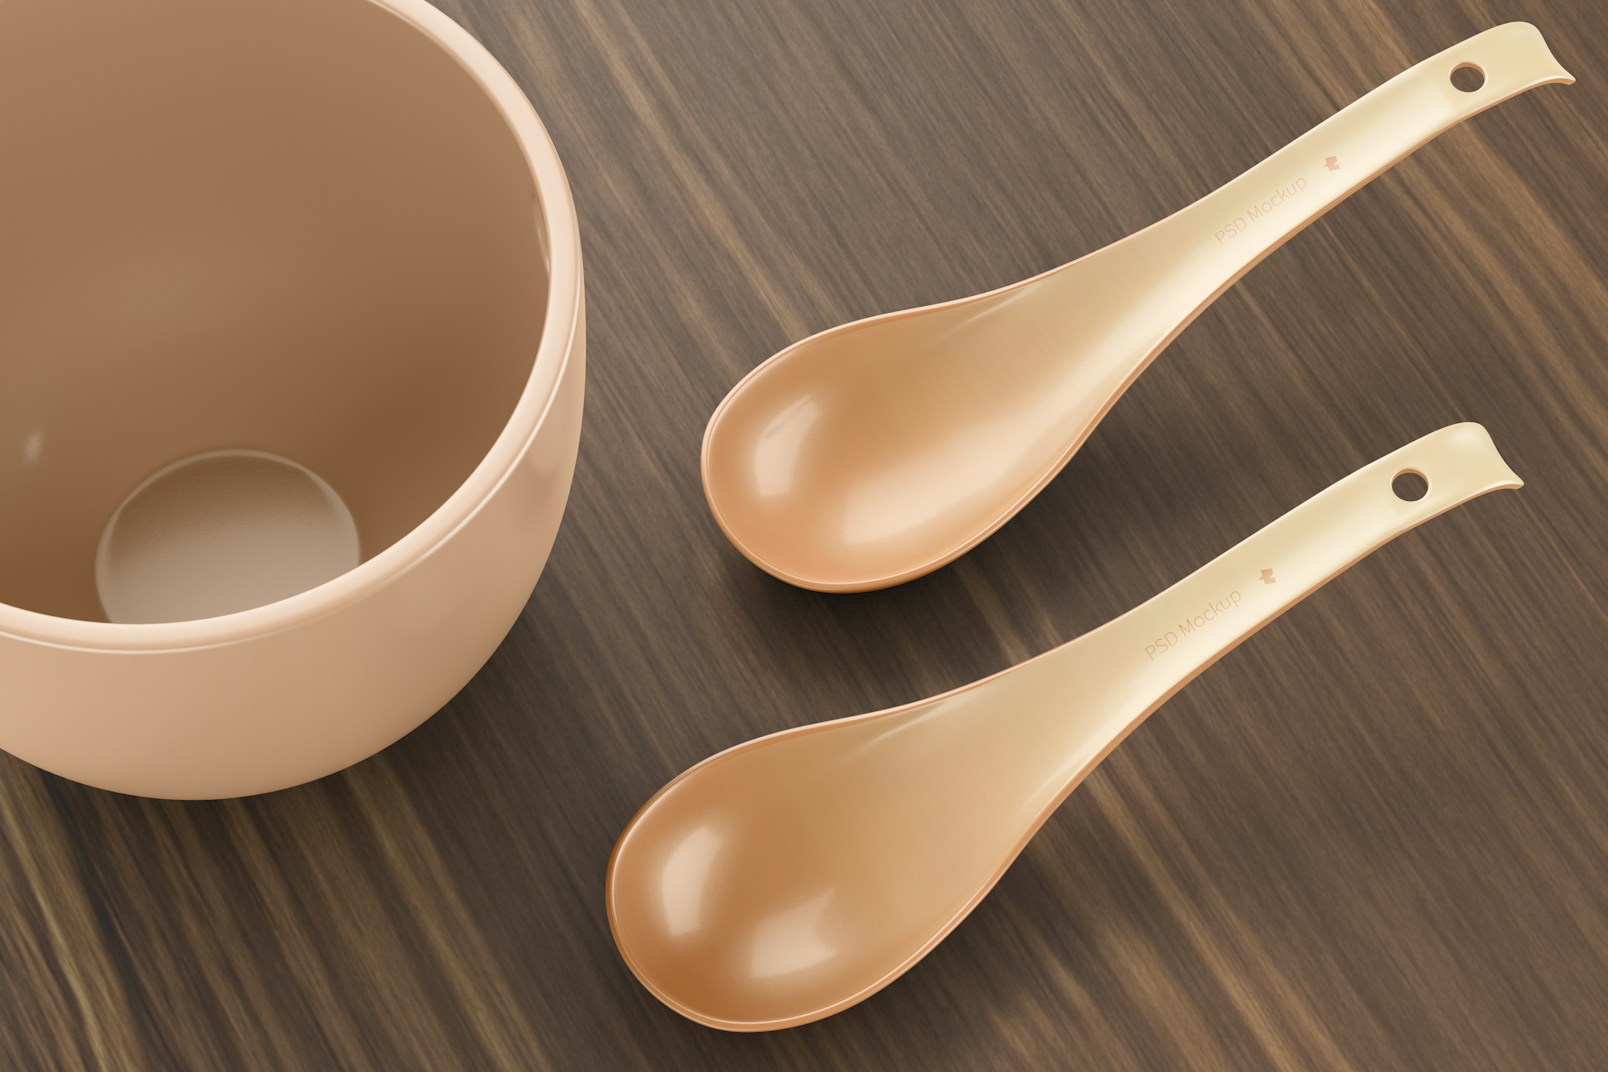 Asian Soup Spoons with Bowl Mockup